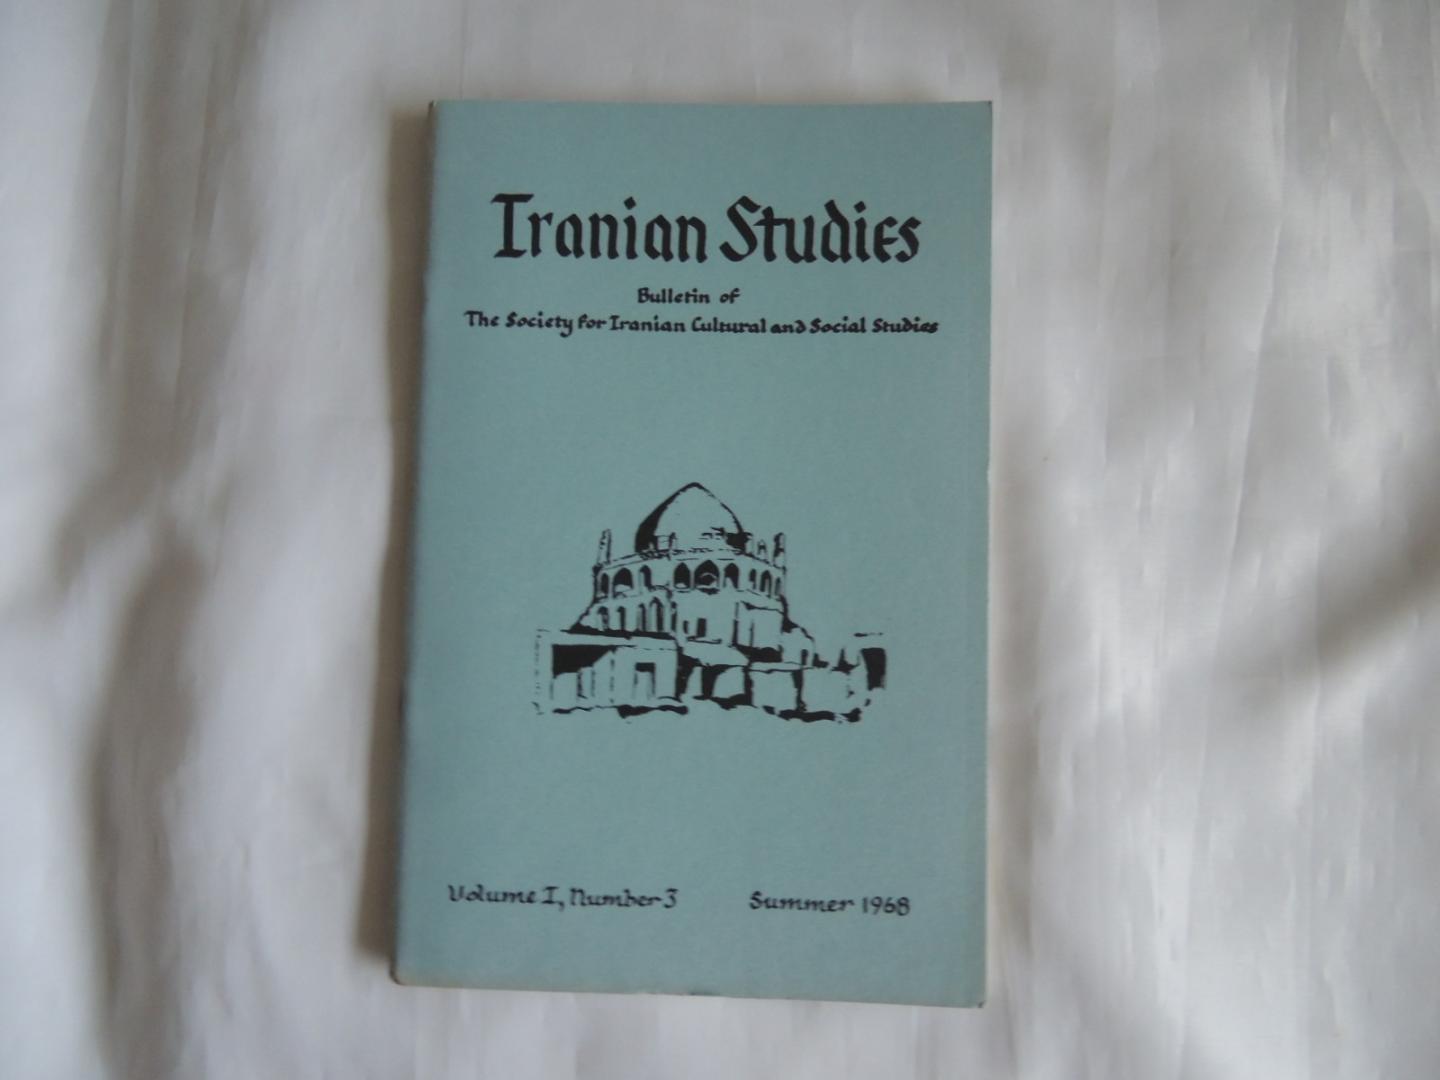 Society for Iranian Studies.; Society for Iranian Cultural and Social Studies - Iranian studies : bulletin of the Society for Iranian Cultural and Social Studies. - 1968 1969 1970 1971 1972 1973 1974 1975 1976 1977. volume 1.2.3.4.5.6.7.8.9.10  COMPLETE including Index.